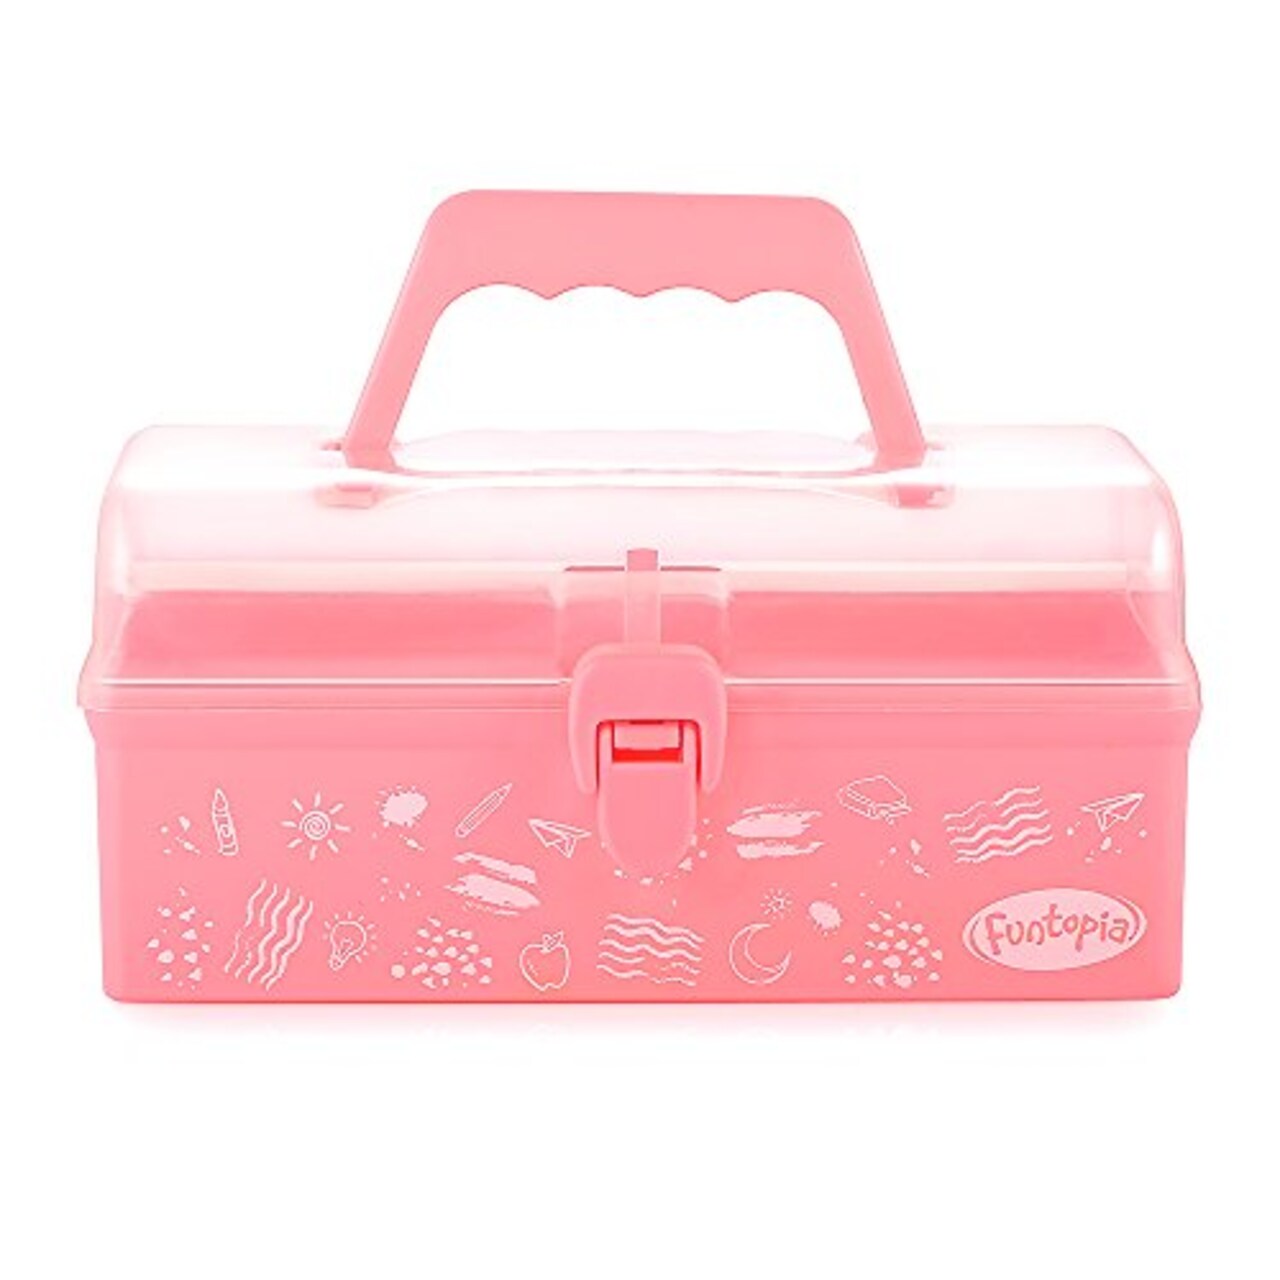 Funtopia Plastic Art Box for Kids, Multi-Purpose Portable Storage Box/Sewing  Box/Tool Box for Kids' Toys, Craft and Art Supply, School Supply, Office  Supply - Pink